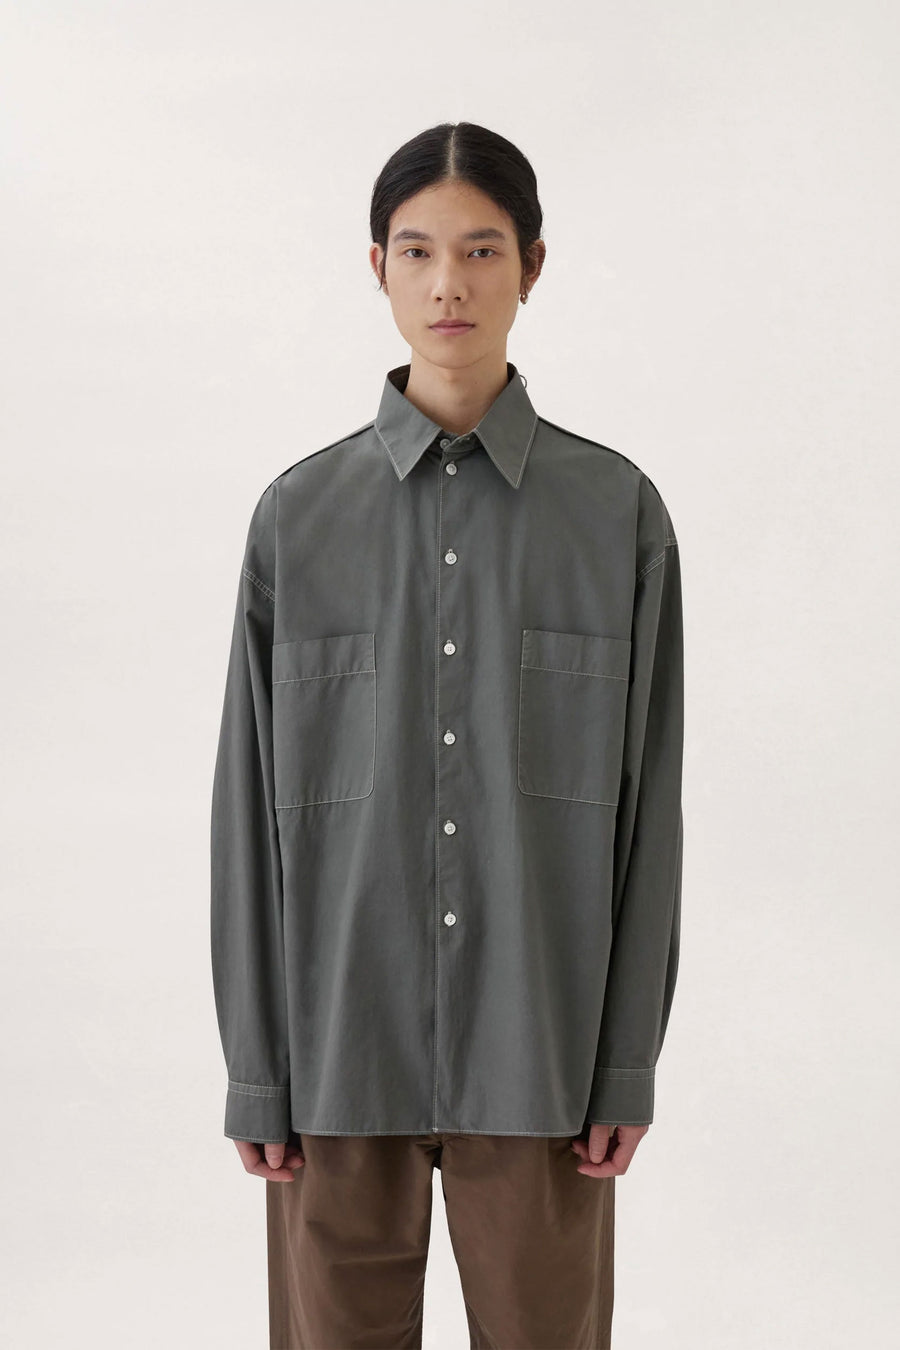 99aw Christophe LEMAIRE waxed pullover